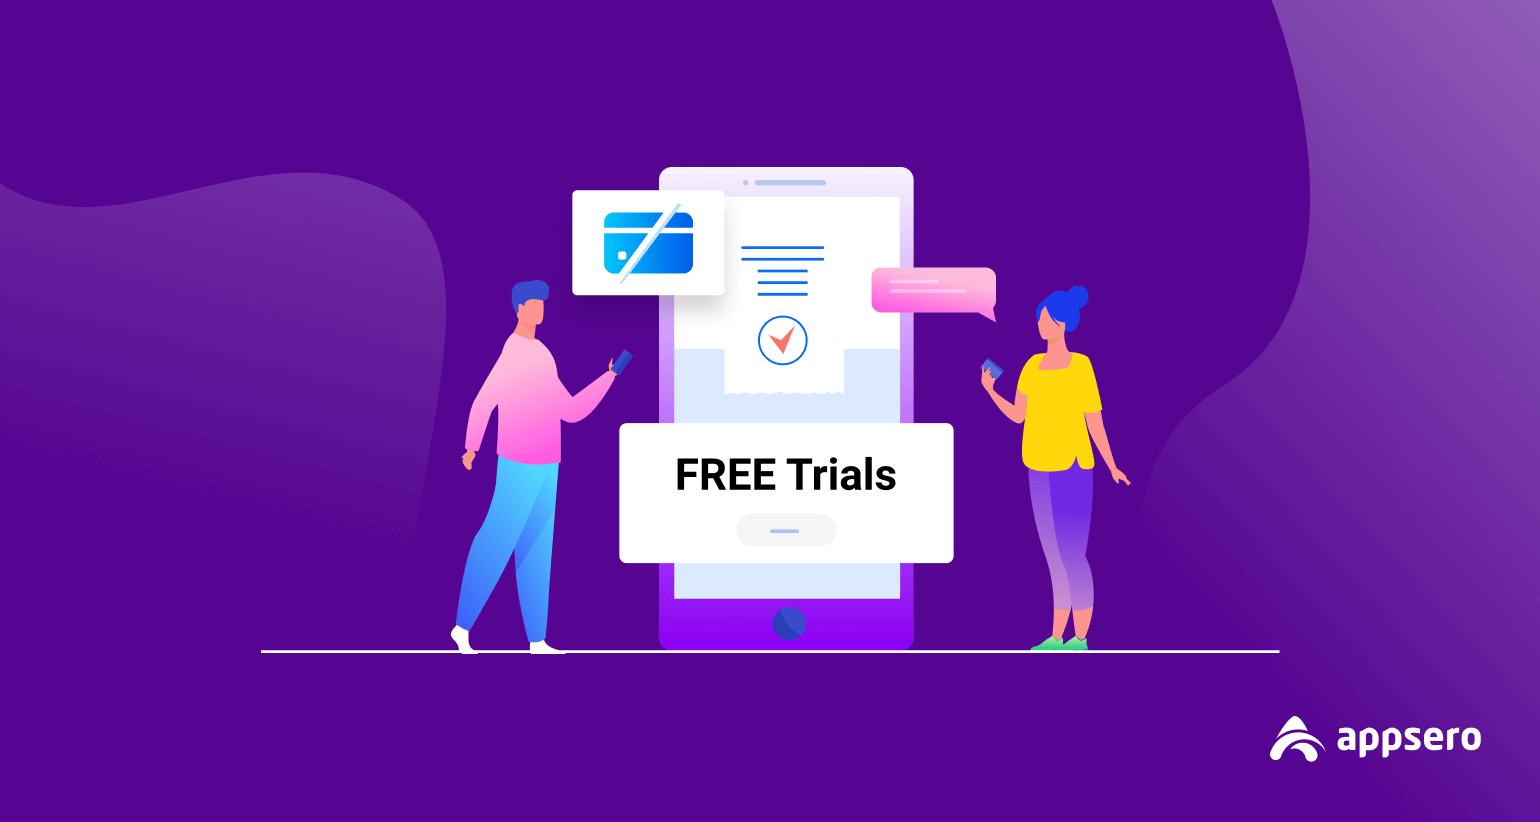 How to Get Free Trials Without Credit Card: 4 Tips from Experts in 2023